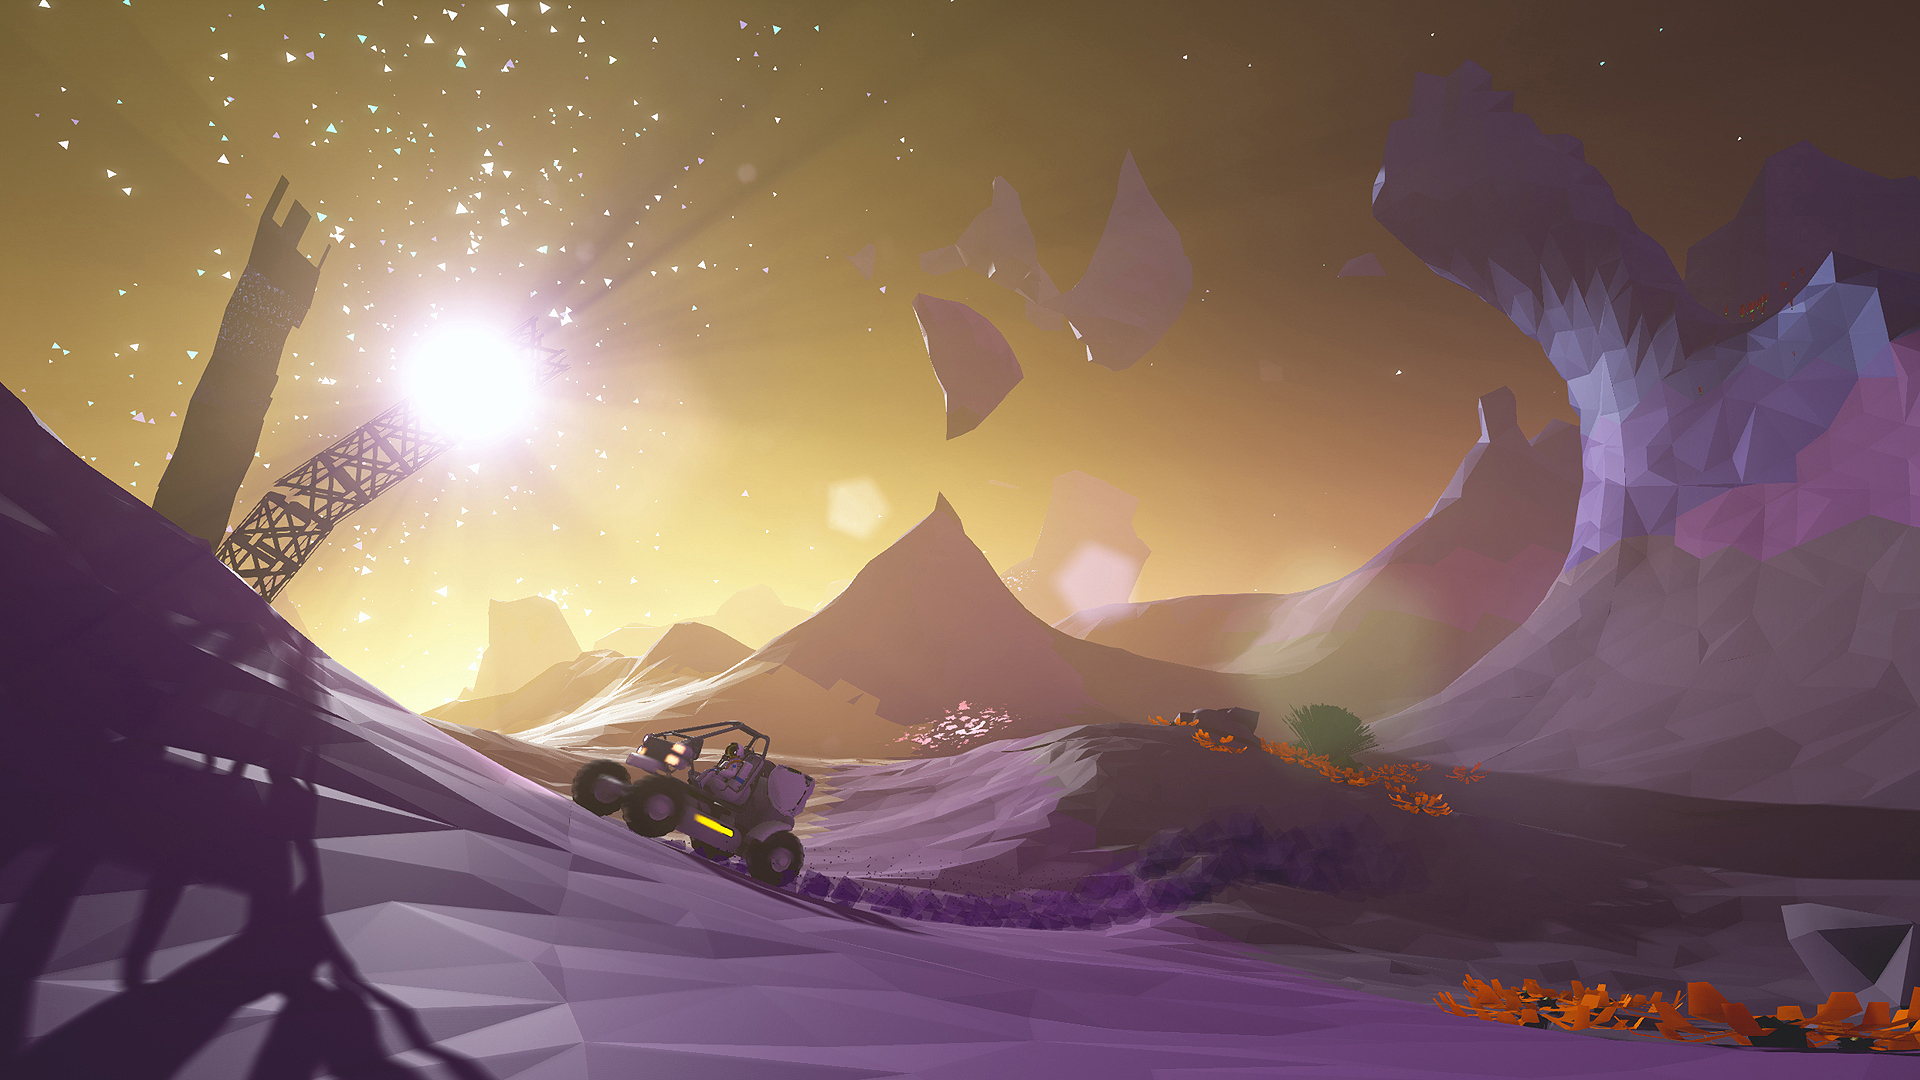 Astroneer launches in the Windows Store for Game Preview Dec. 16